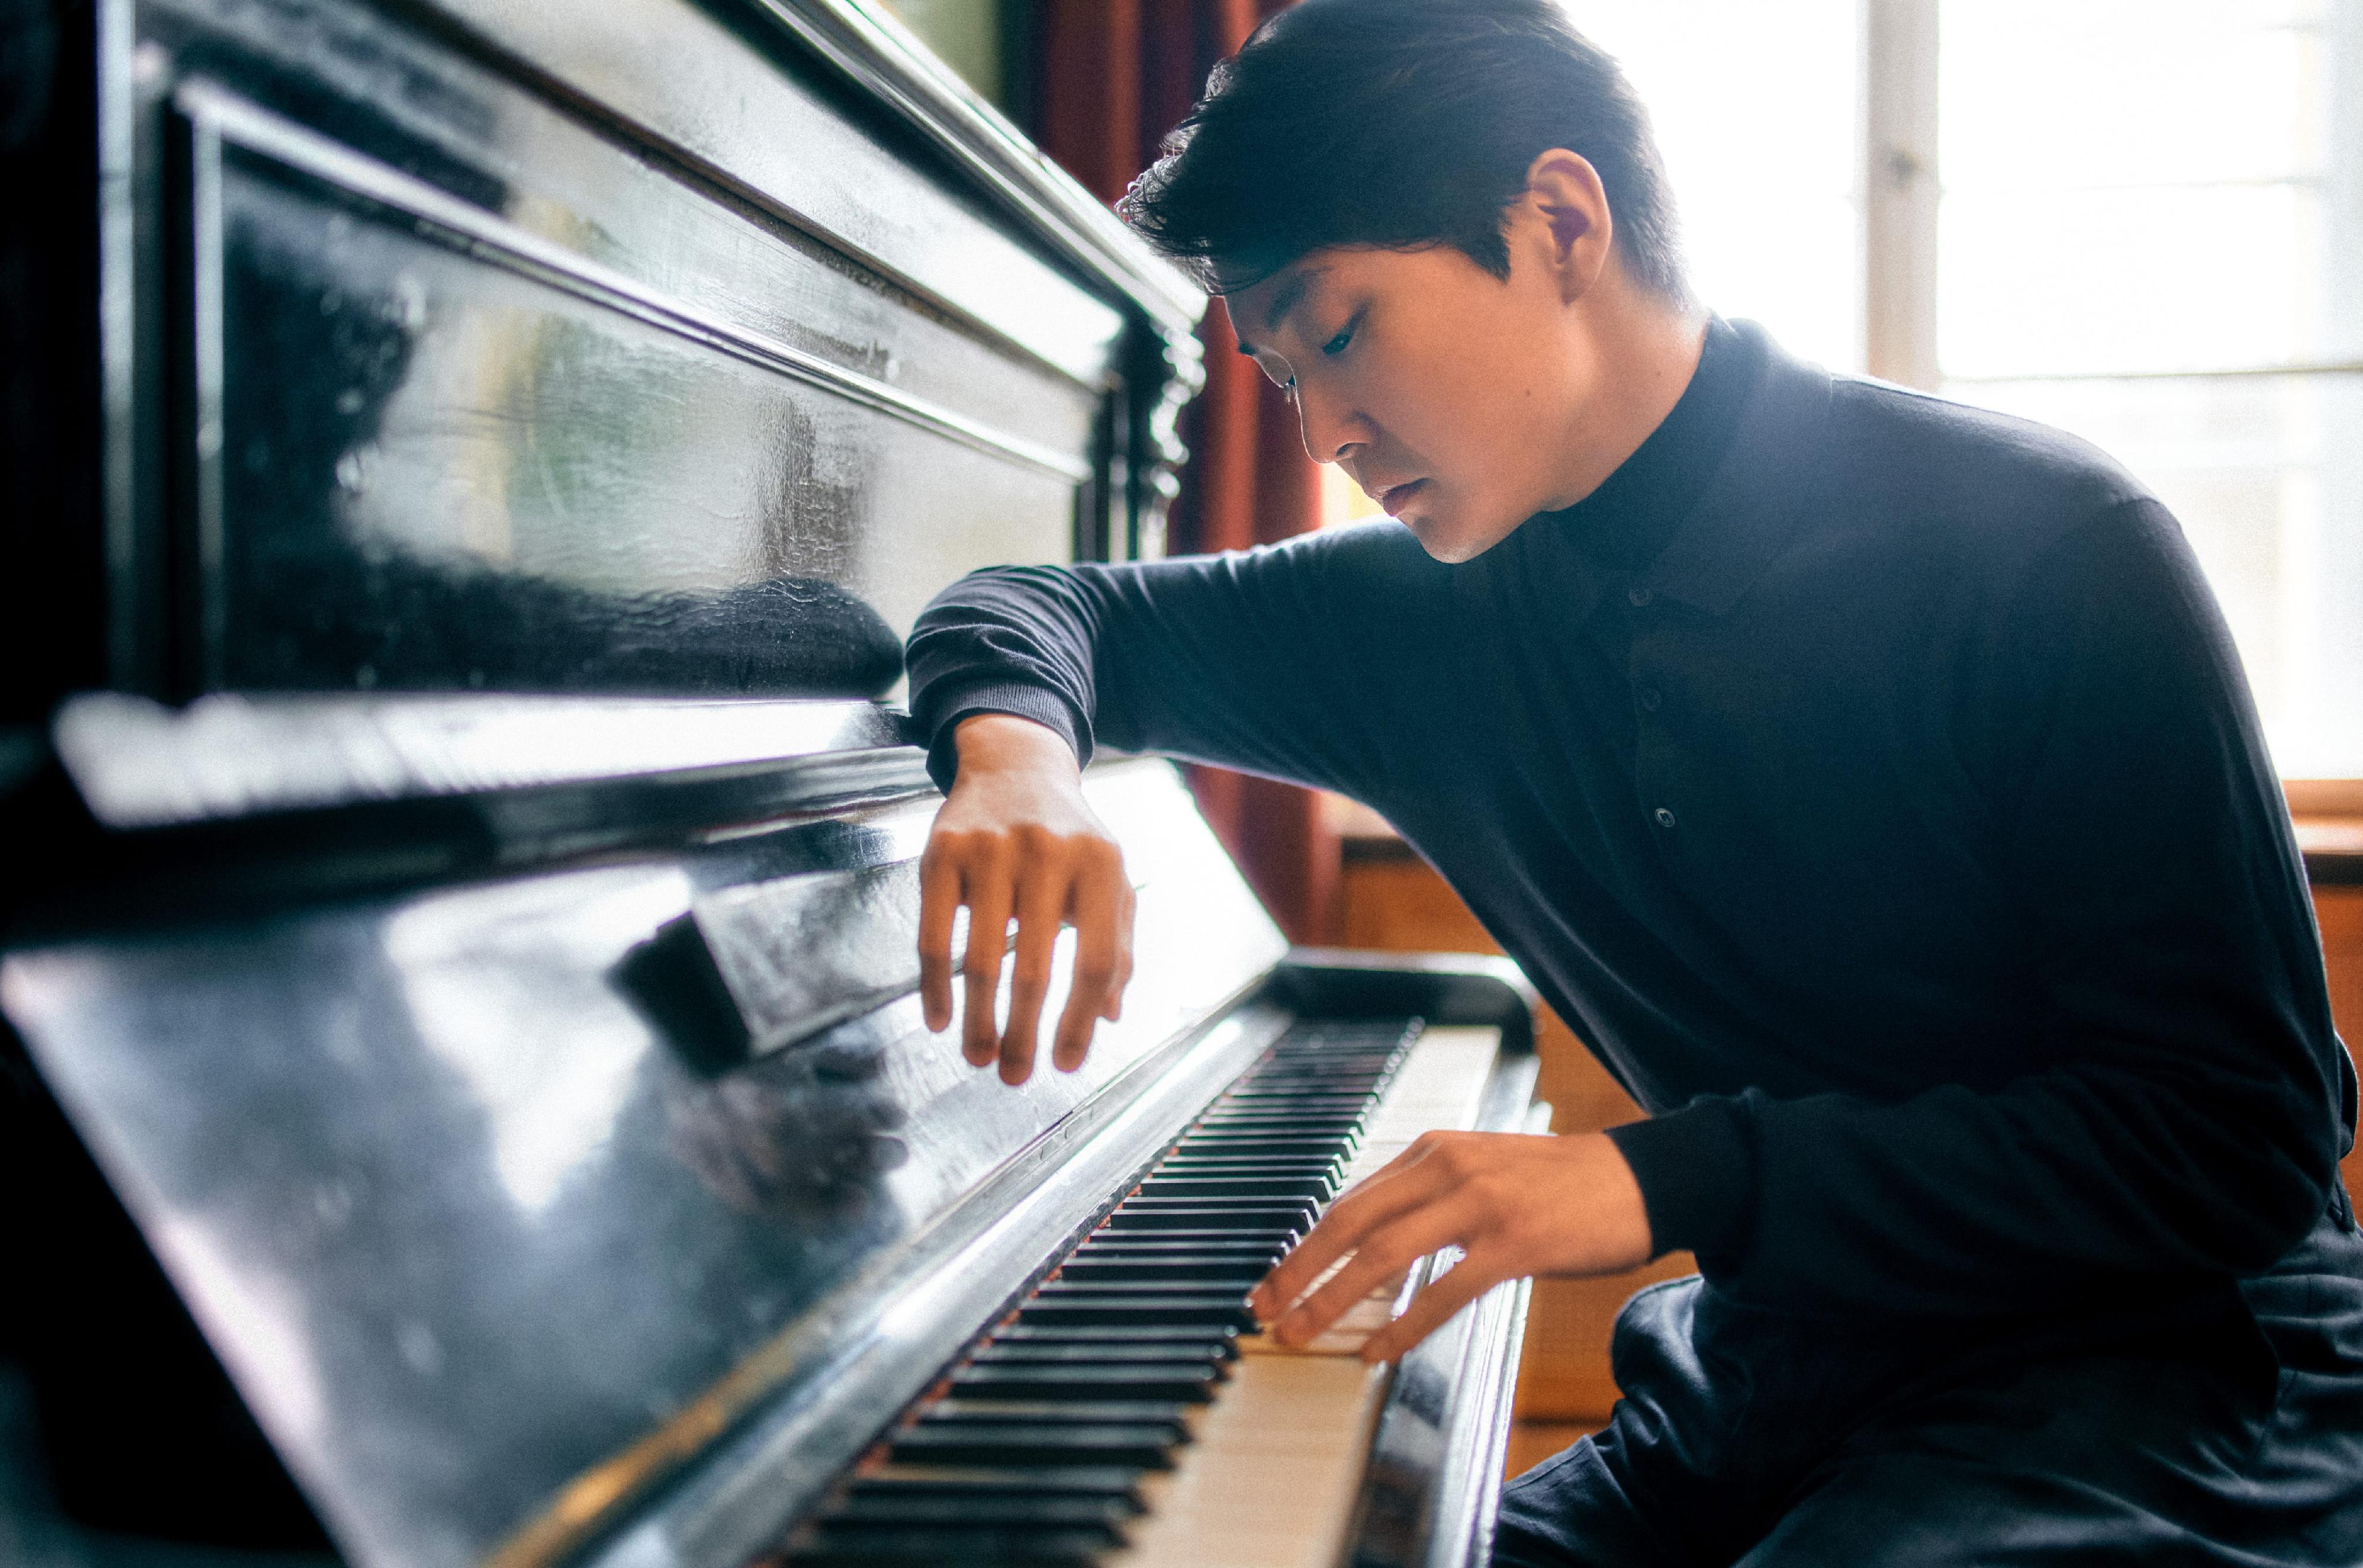 Highly sought-after pianist Seong-Jin Cho will give a recital in Hong Kong in November. Photo shows Cho. (Source of photo: Christoph Koestlin-DG)